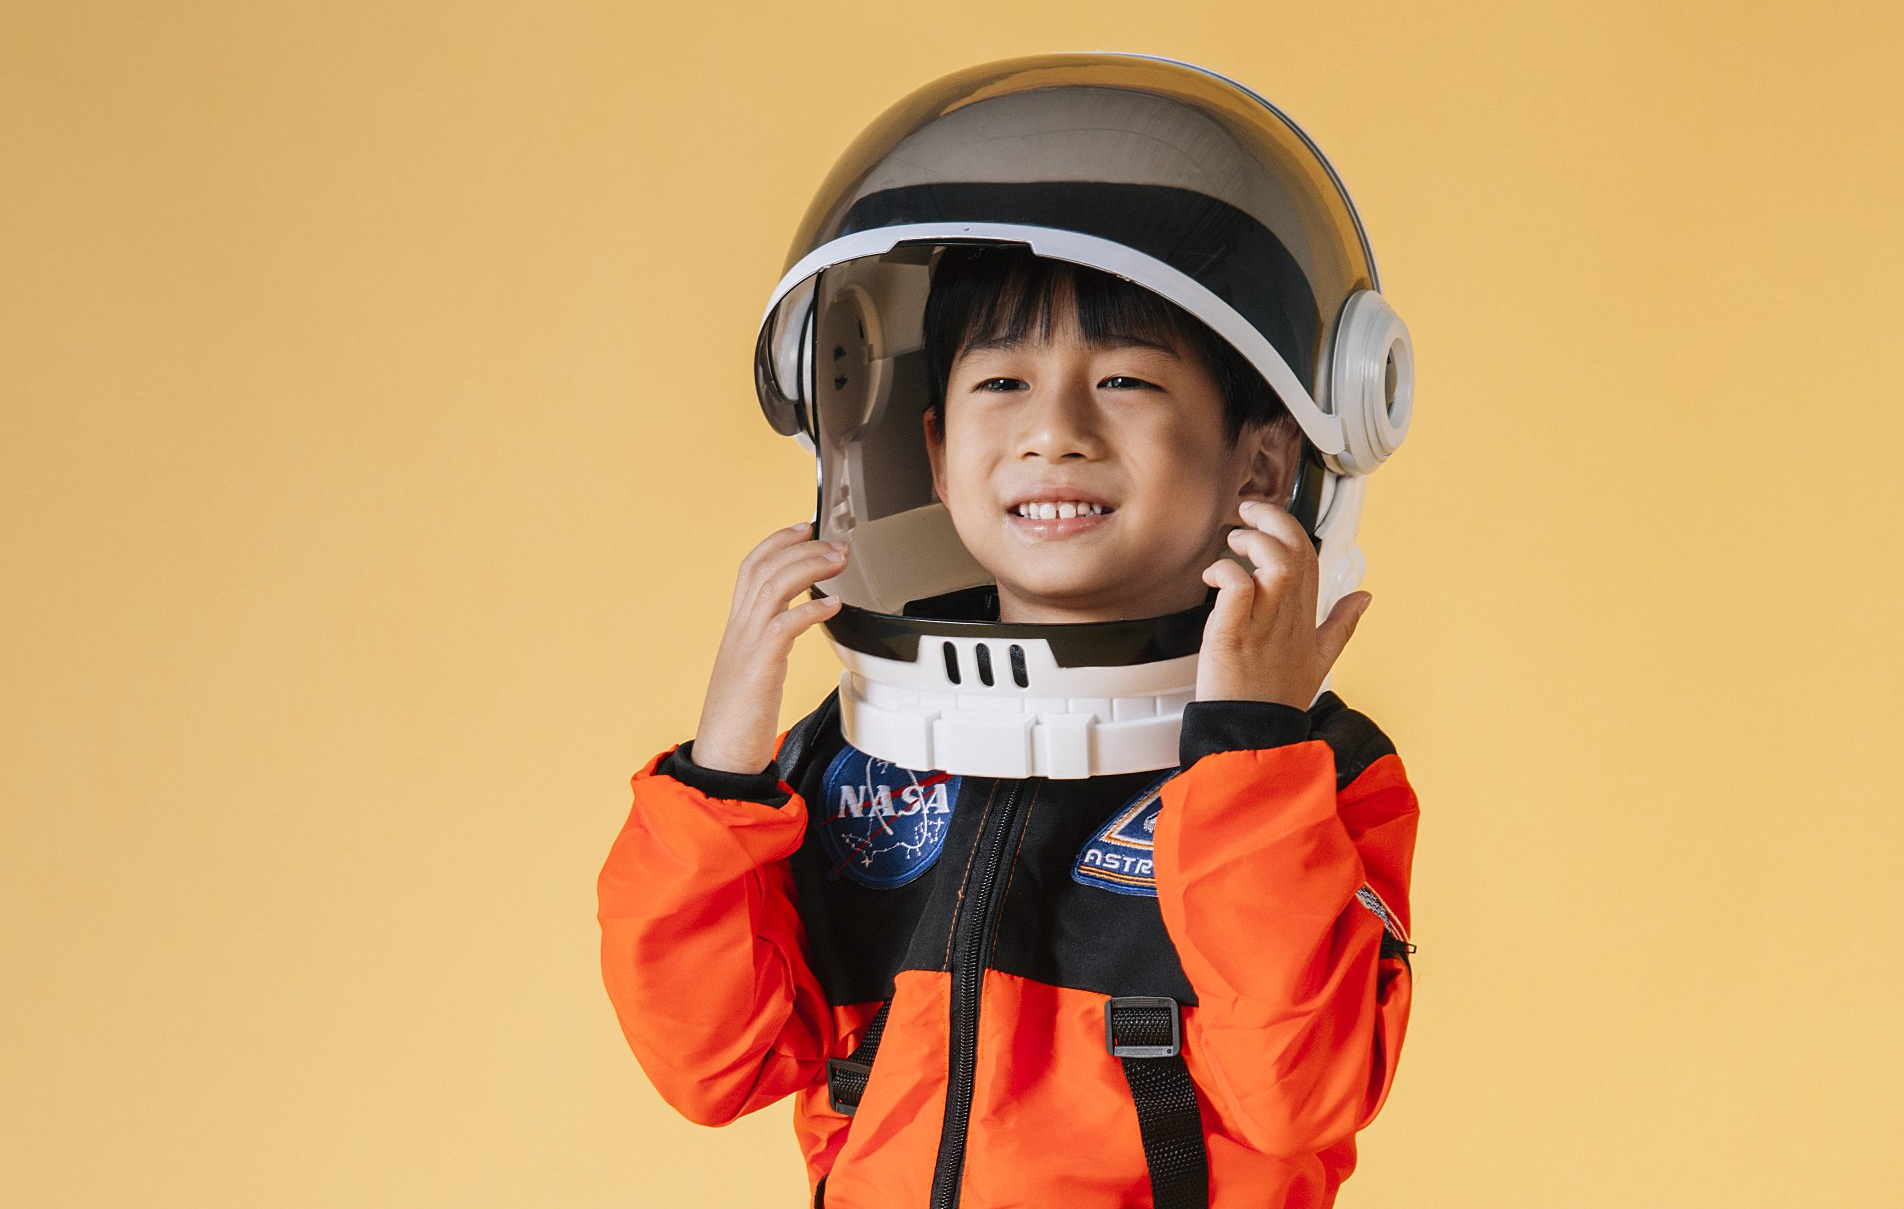 A young boy dressed as an astronaut is putting on a helmet.